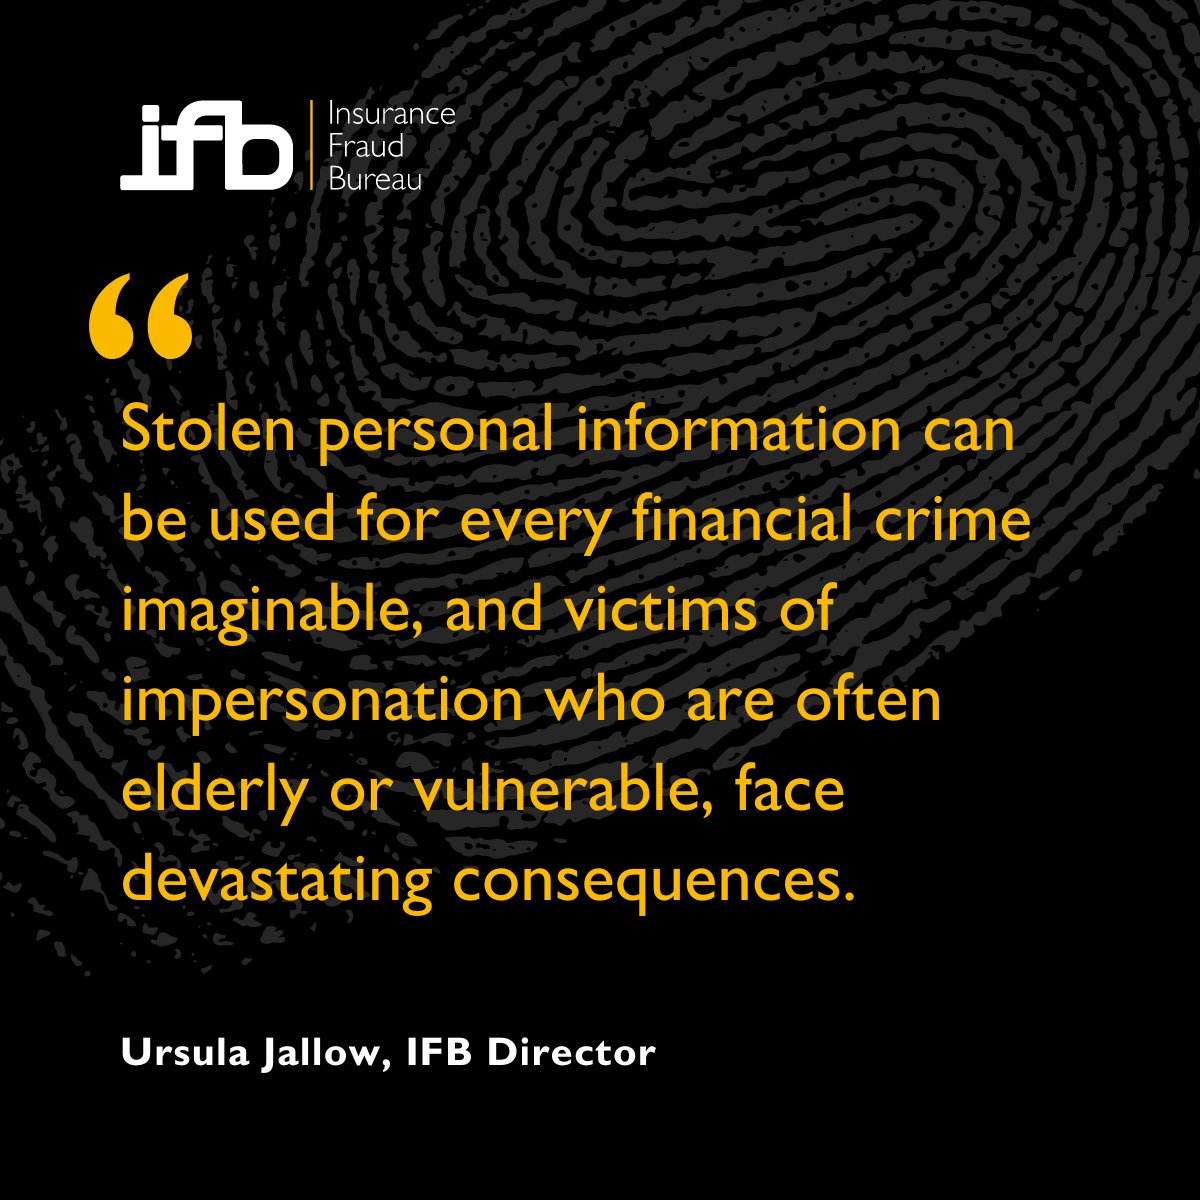 Stolen identities are used by fraudsters for a wide range of #InsuranceScams, leaving victims of impersonation in financial hardship and emotional distress. Find out more about our warning of a rise in scams being facilitated by #IDTheft: ow.ly/8lJI50ReNna